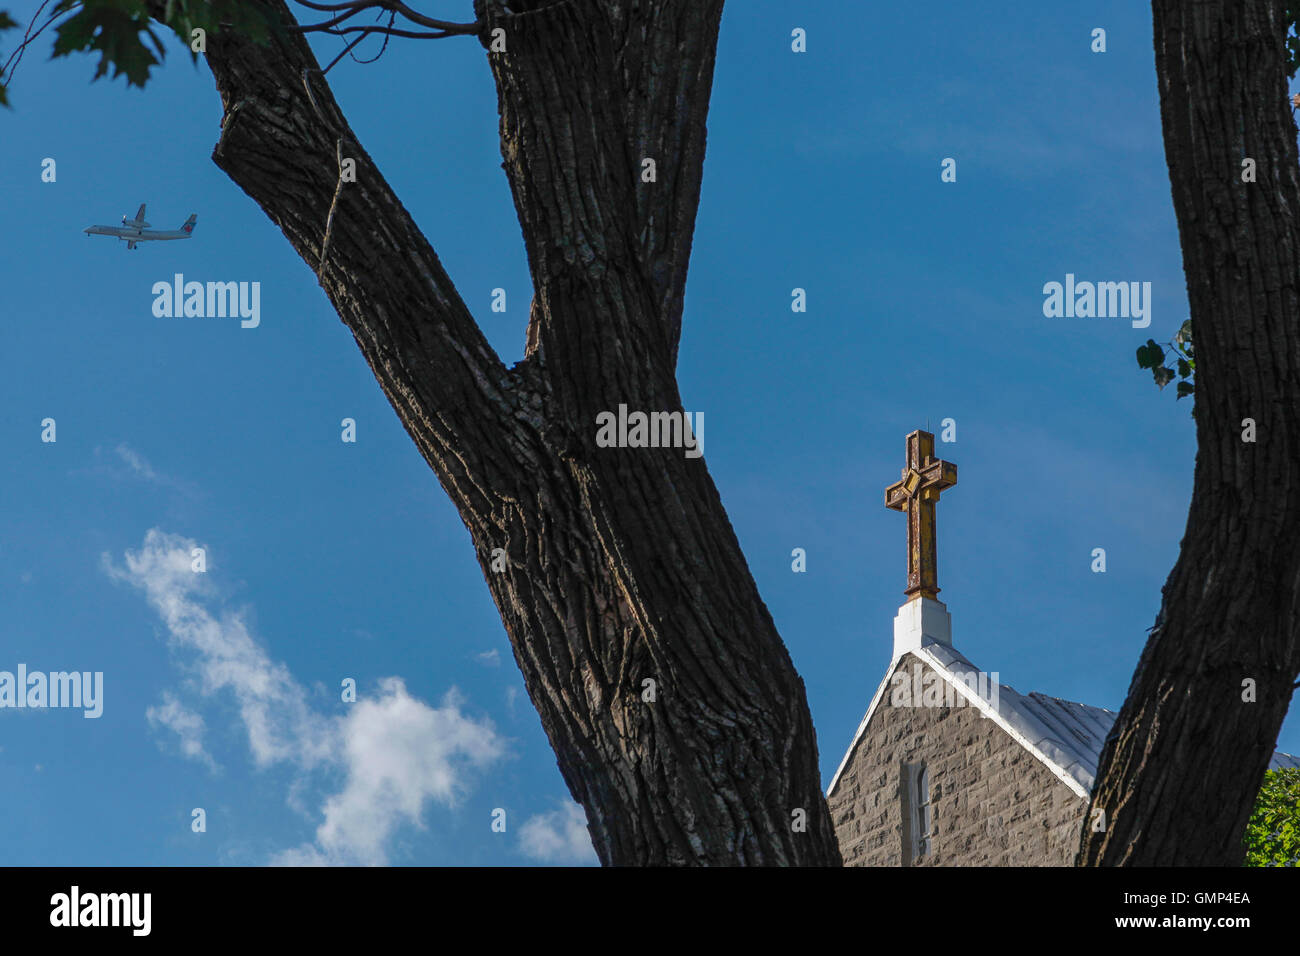 A church cross framed between tree trunks with an aircraft passing by. Stock Photo